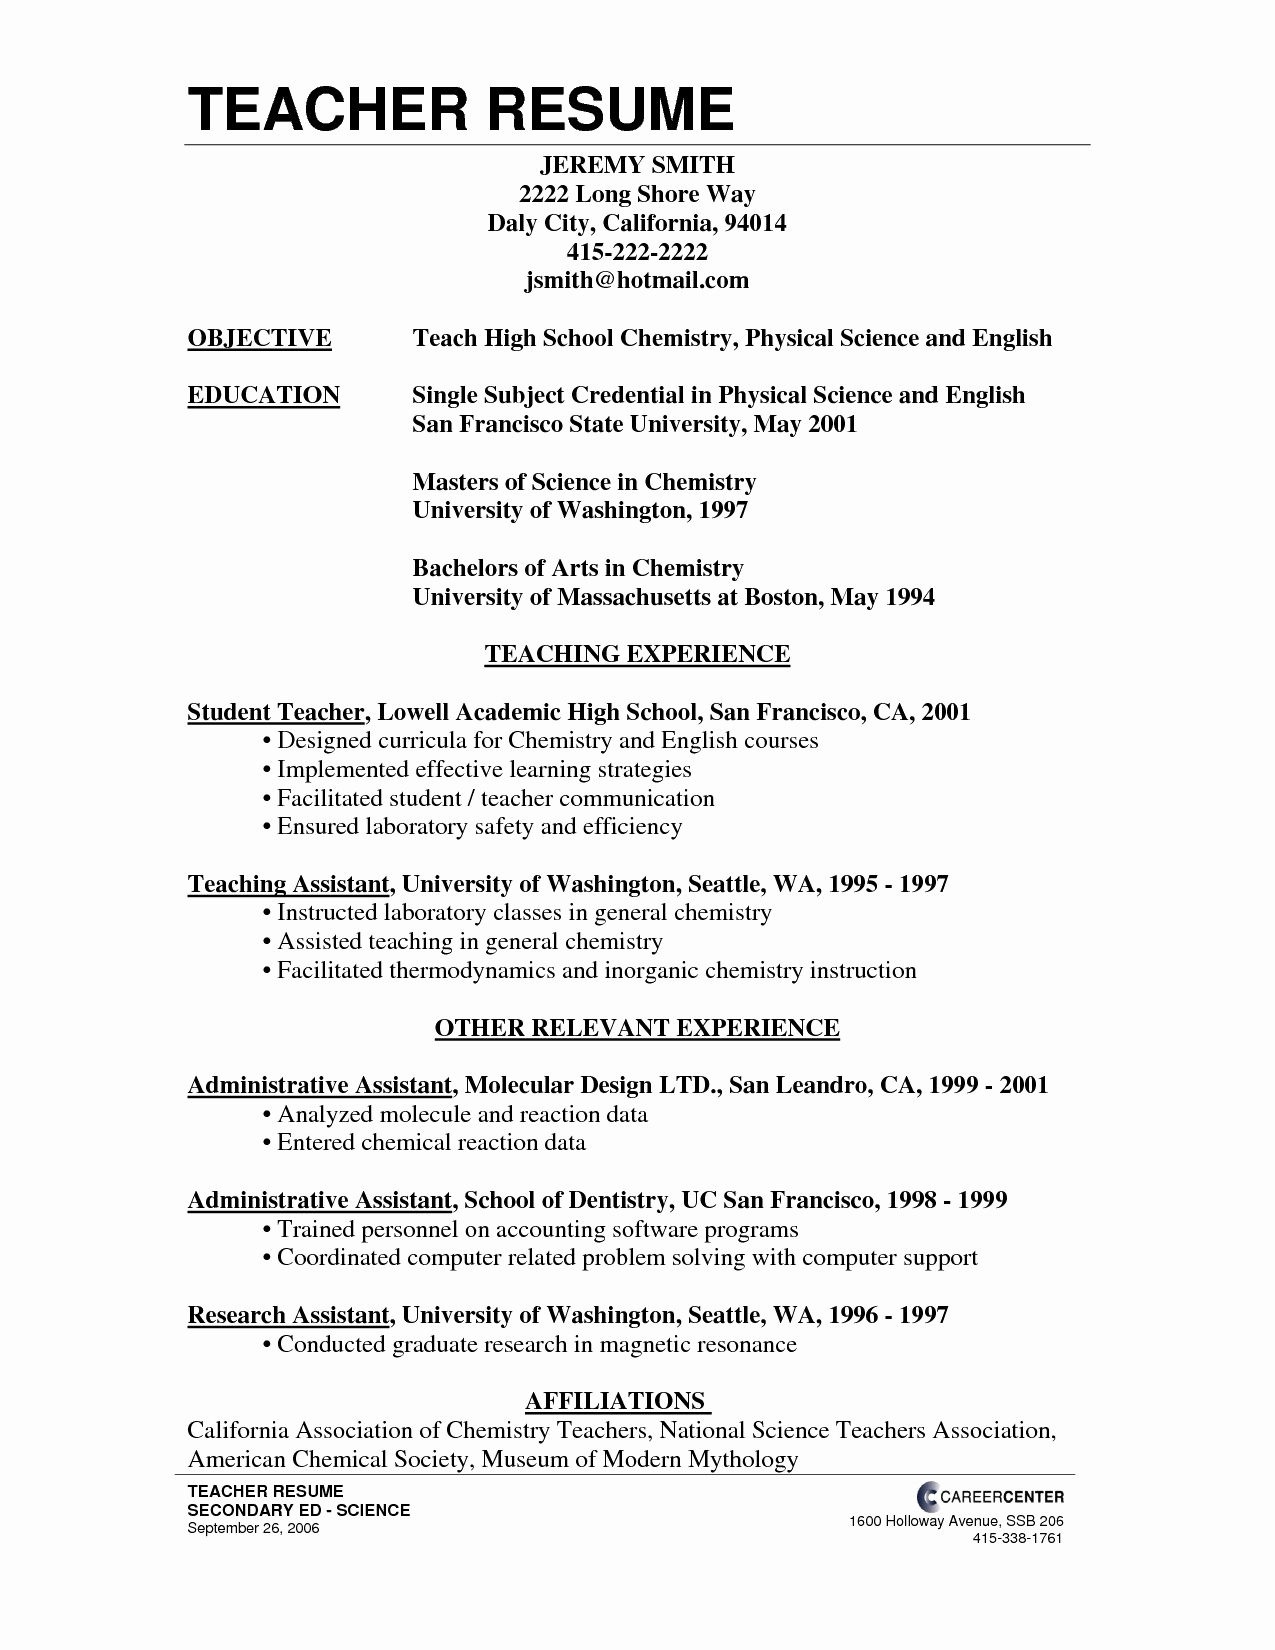 Free Introduction Letter Template - Resume Cover Letter Example New Free Cover Letter Templates Examples